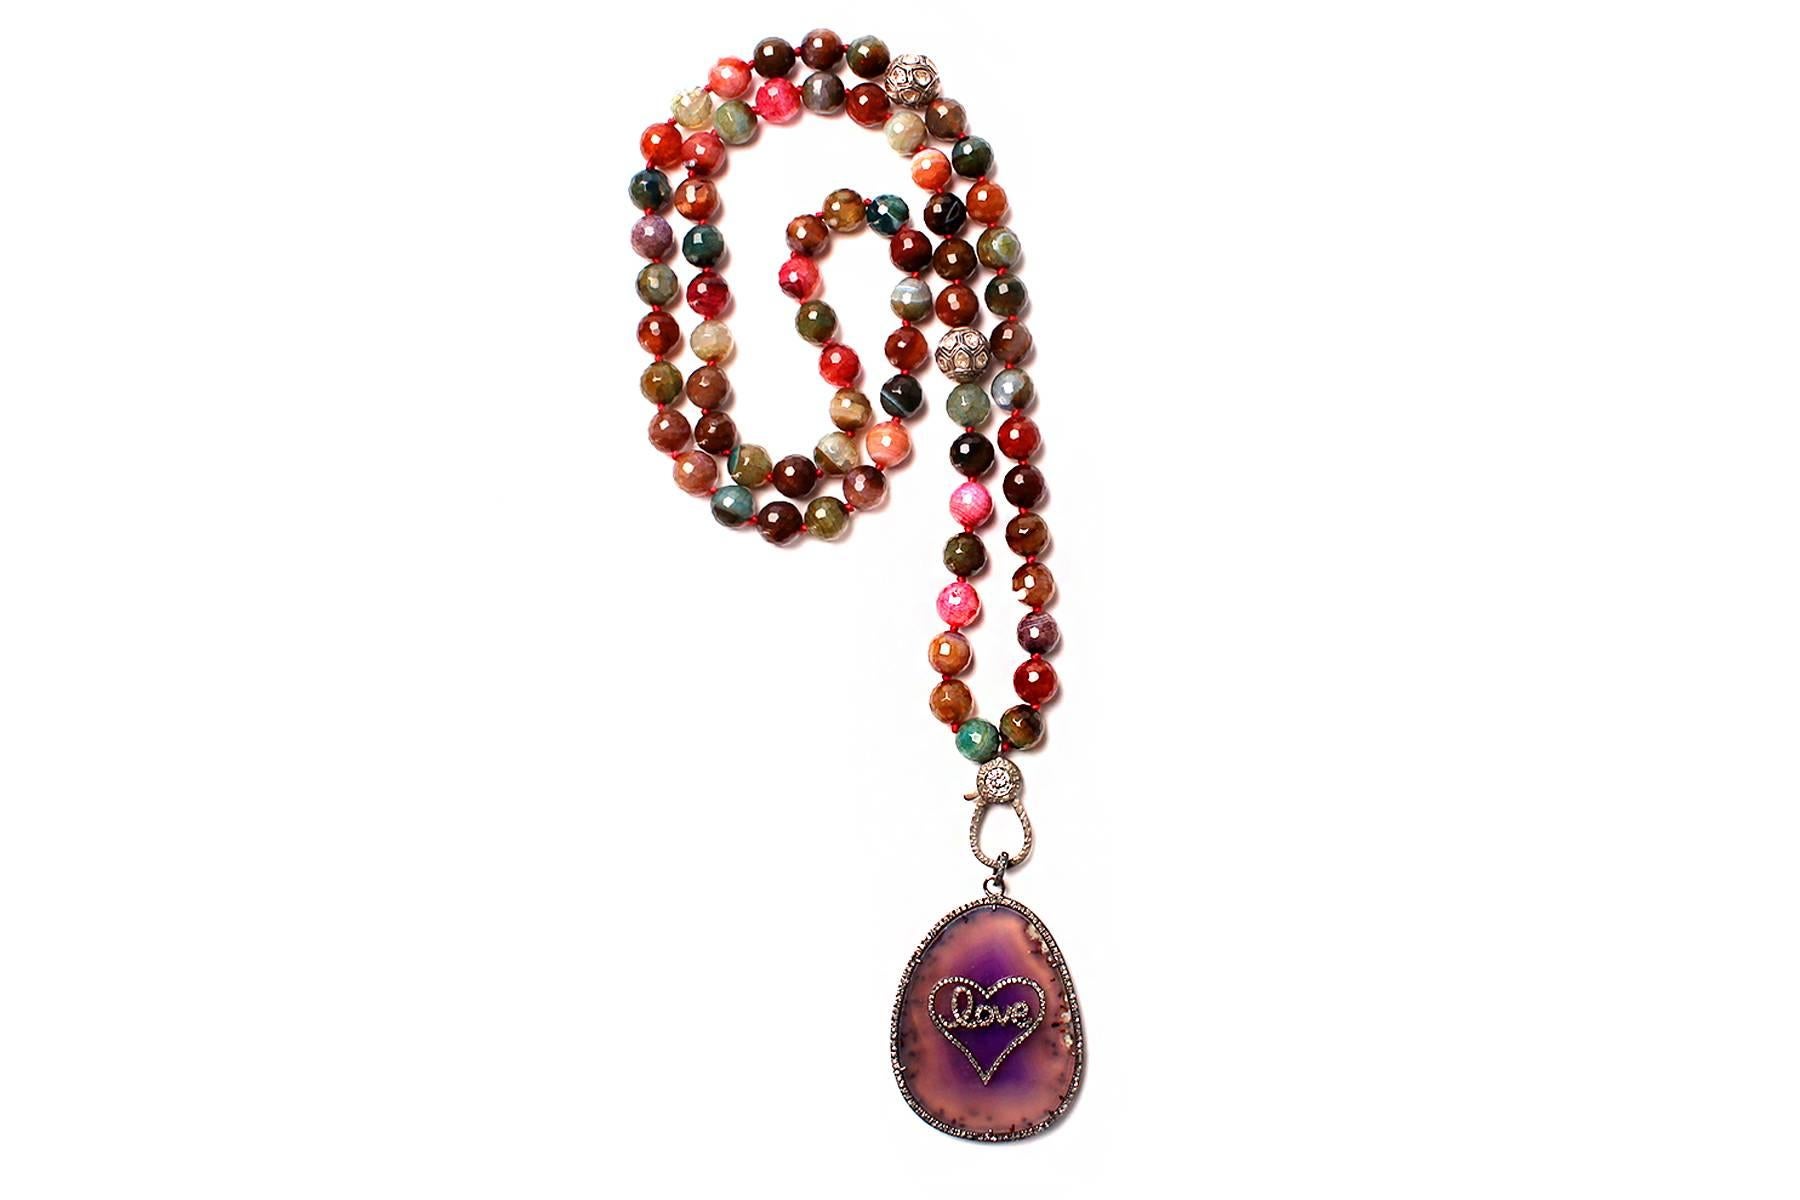 Contemporary Clarissa Bronfman Agate and Diamond Beaded Necklace